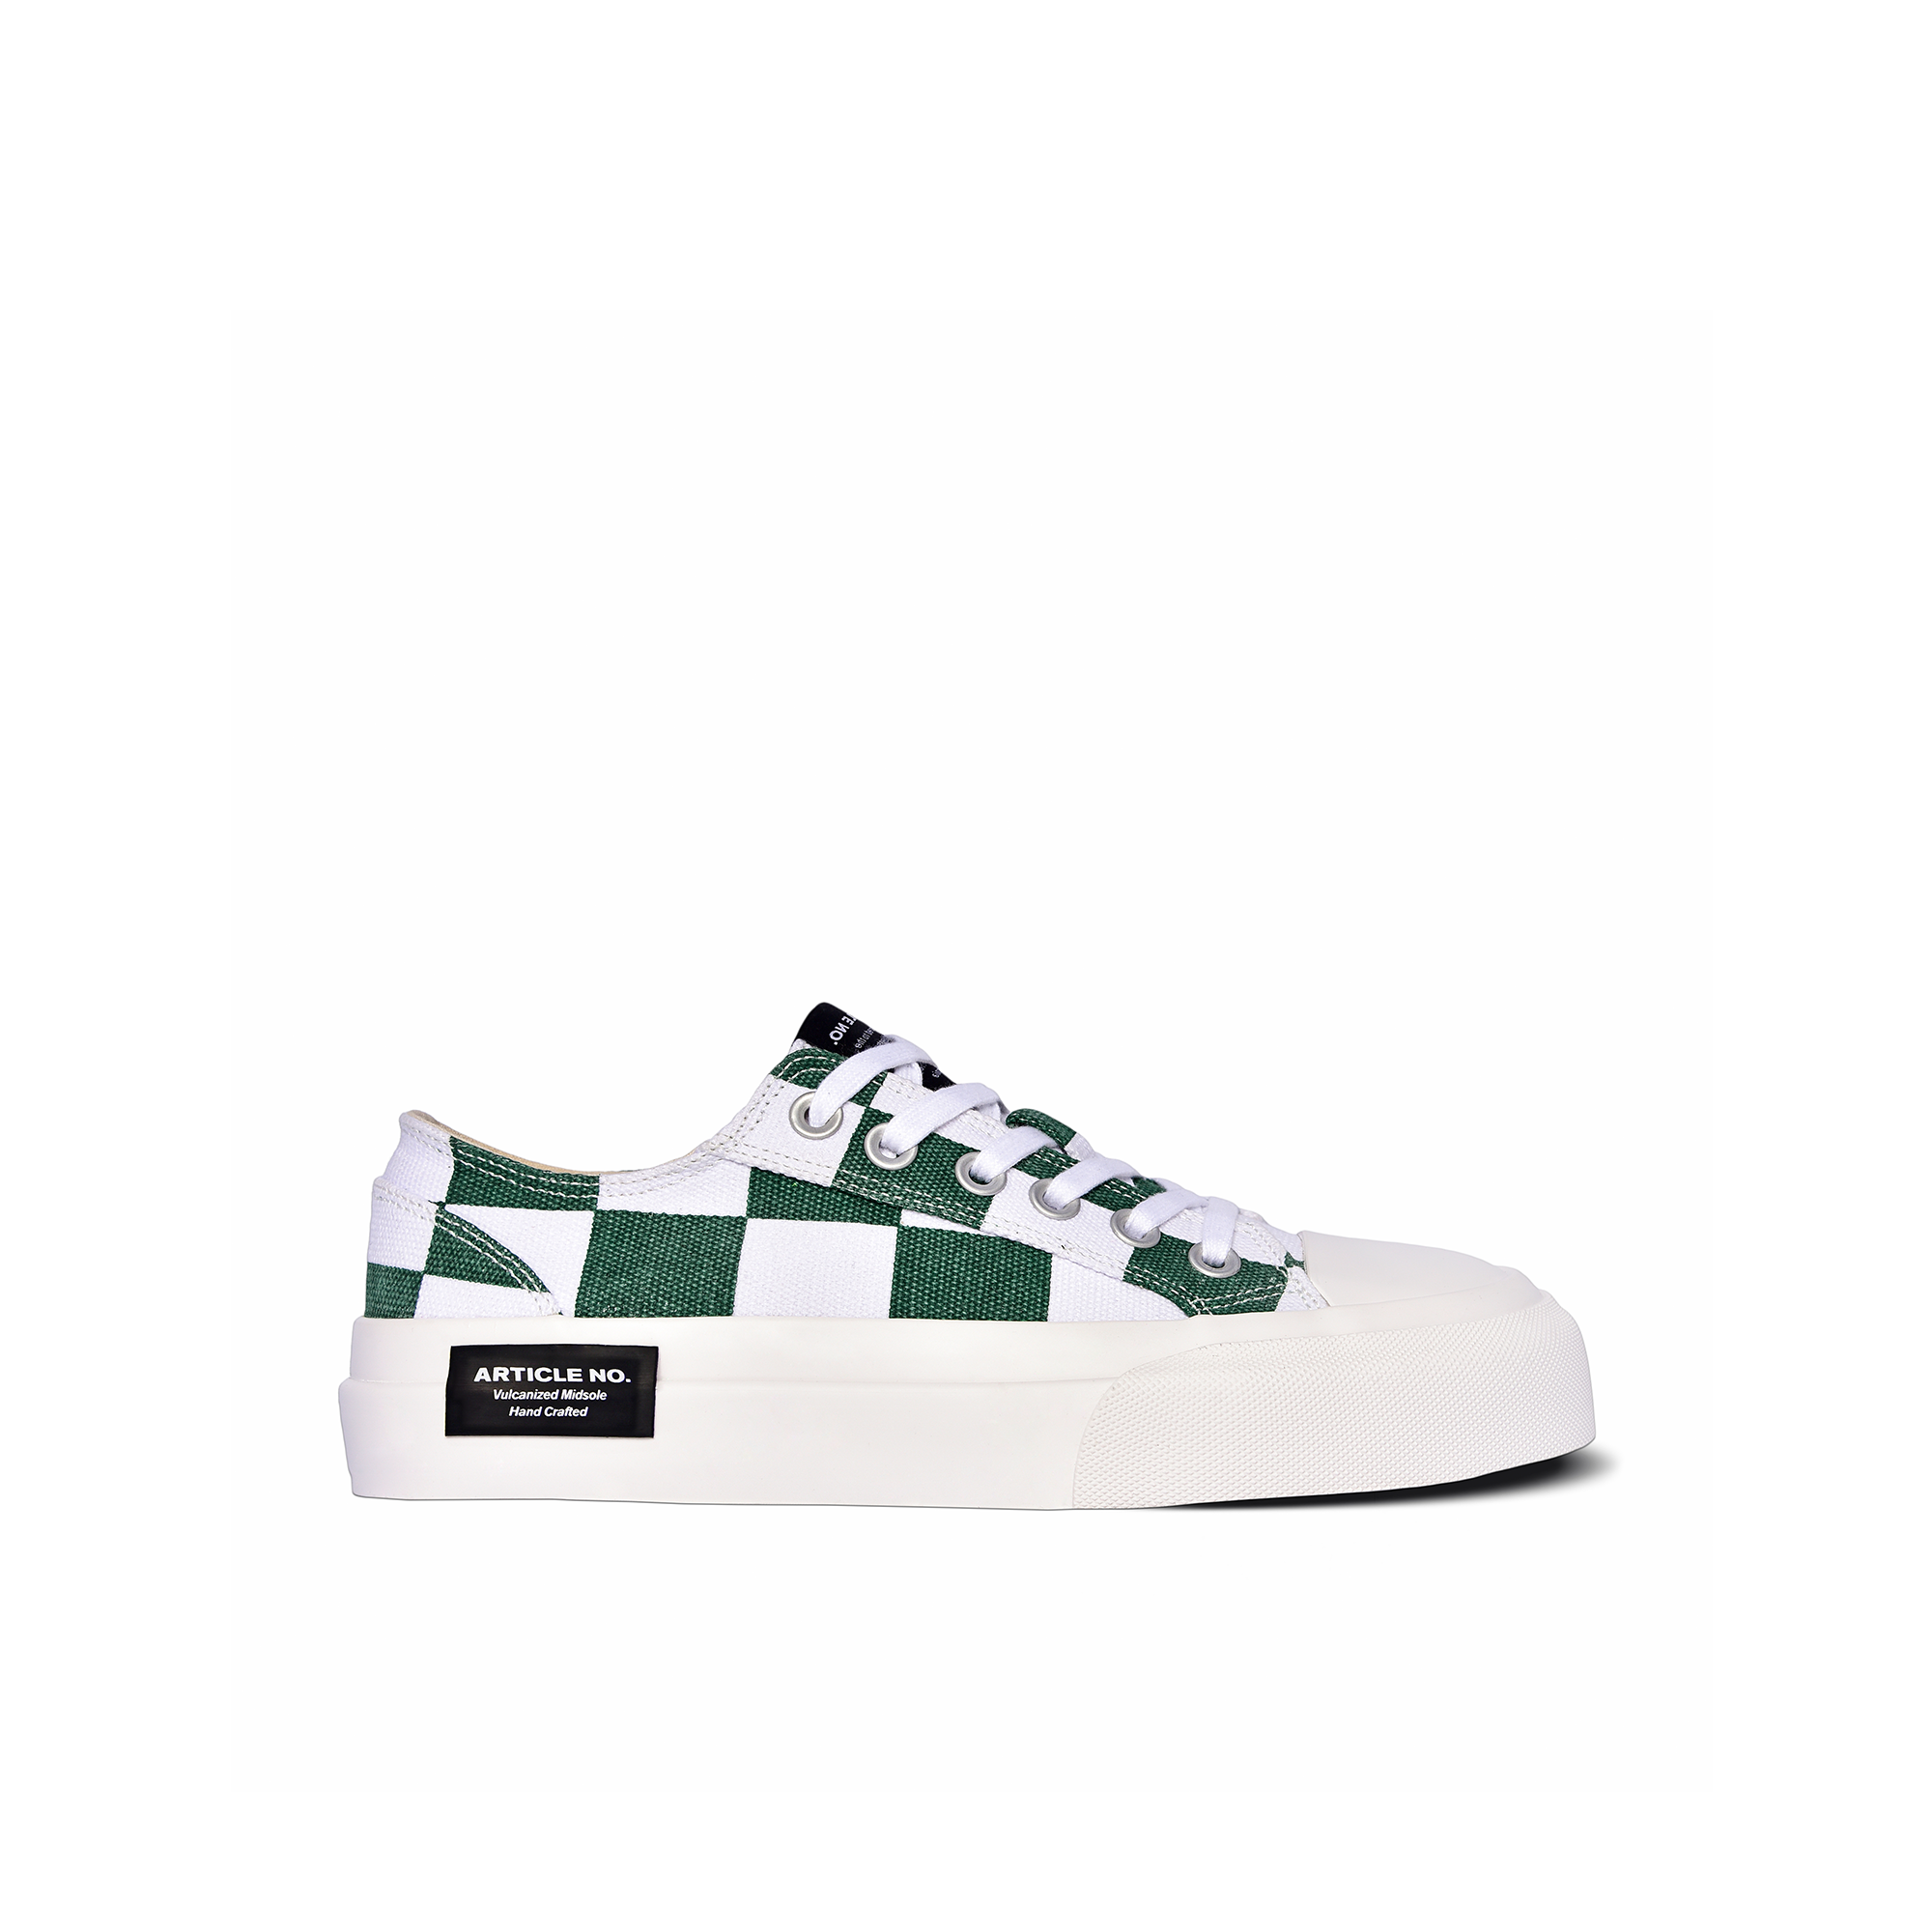 ARTICLE NO. 1007-S4-01 LOW-TOP GREEN CHECK VULCANIZED